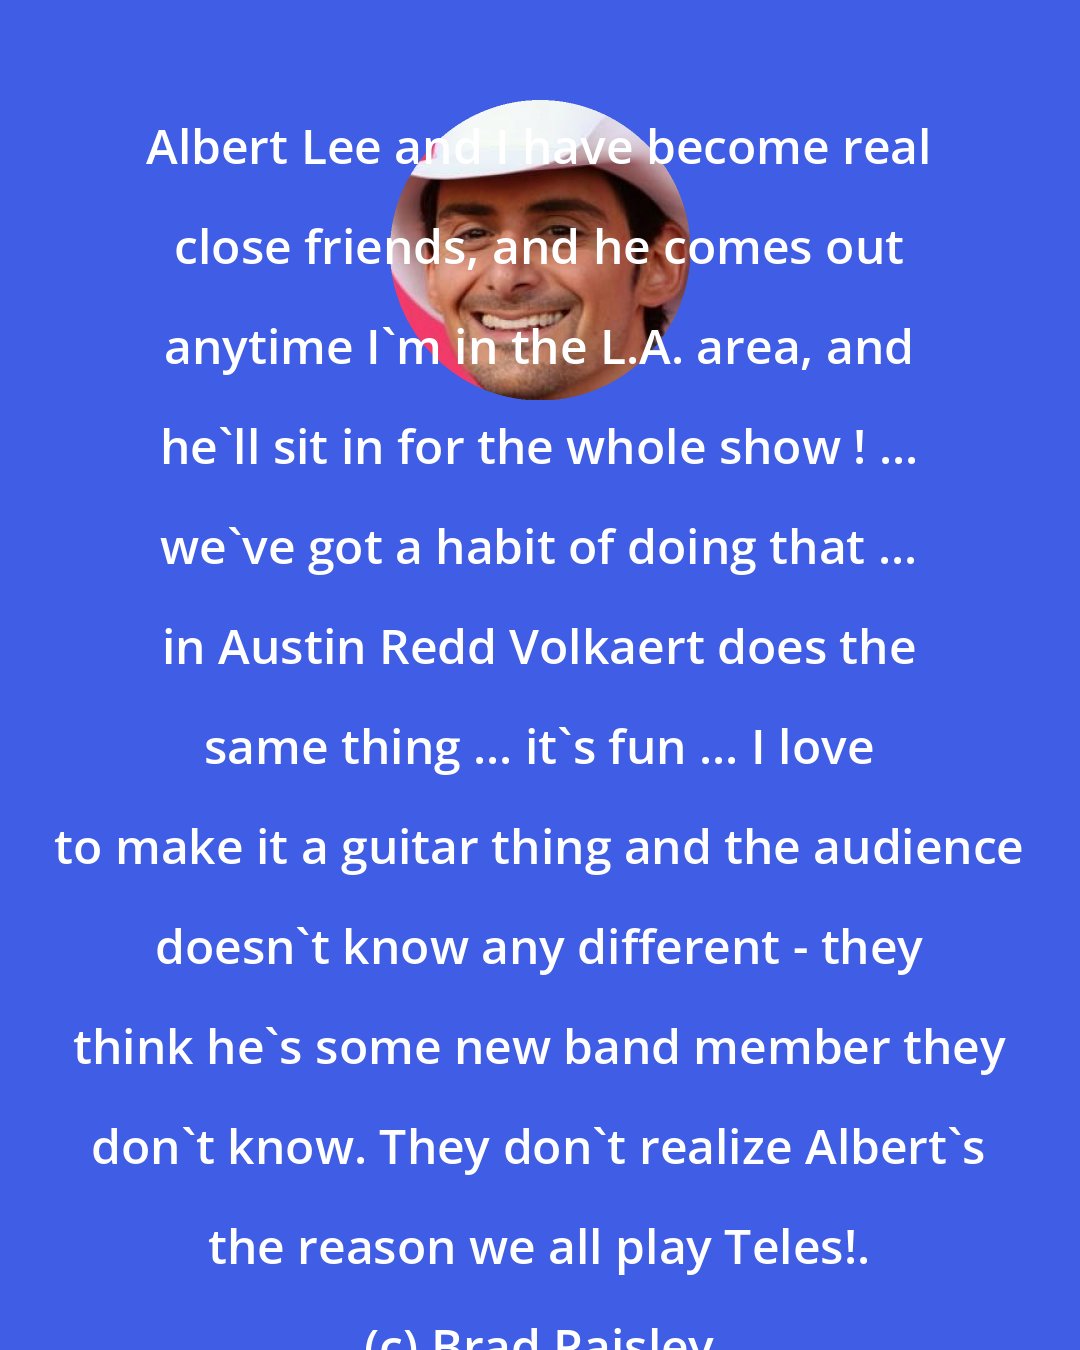 Brad Paisley: Albert Lee and I have become real close friends, and he comes out anytime I'm in the L.A. area, and he'll sit in for the whole show ! ... we've got a habit of doing that ... in Austin Redd Volkaert does the same thing ... it's fun ... I love to make it a guitar thing and the audience doesn't know any different - they think he's some new band member they don't know. They don't realize Albert's the reason we all play Teles!.